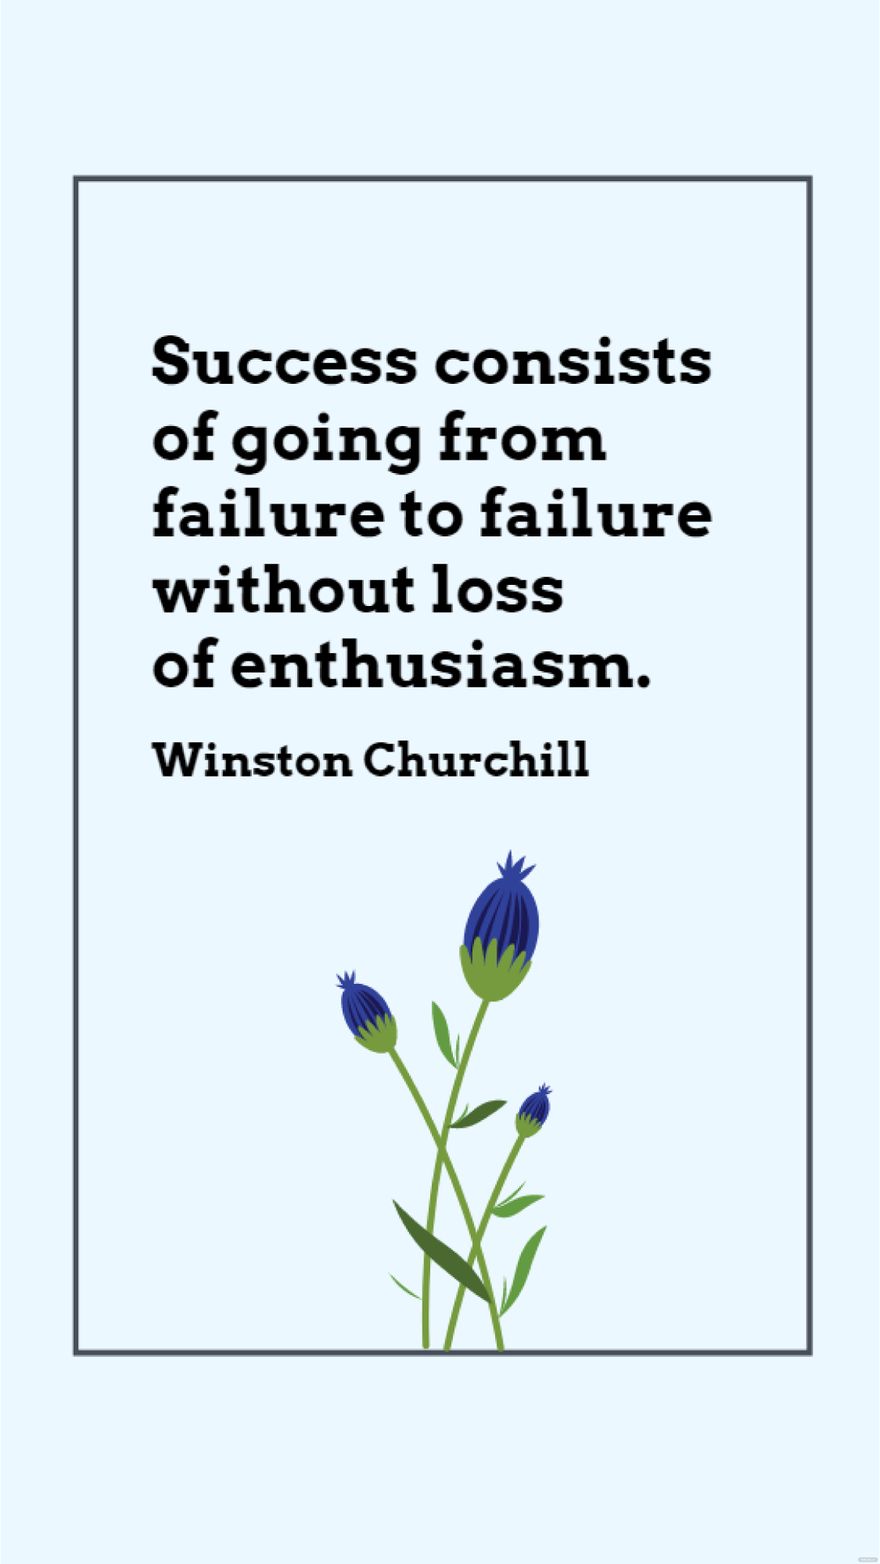 Winston Churchill - Success consists of going from failure to failure without loss of enthusiasm.